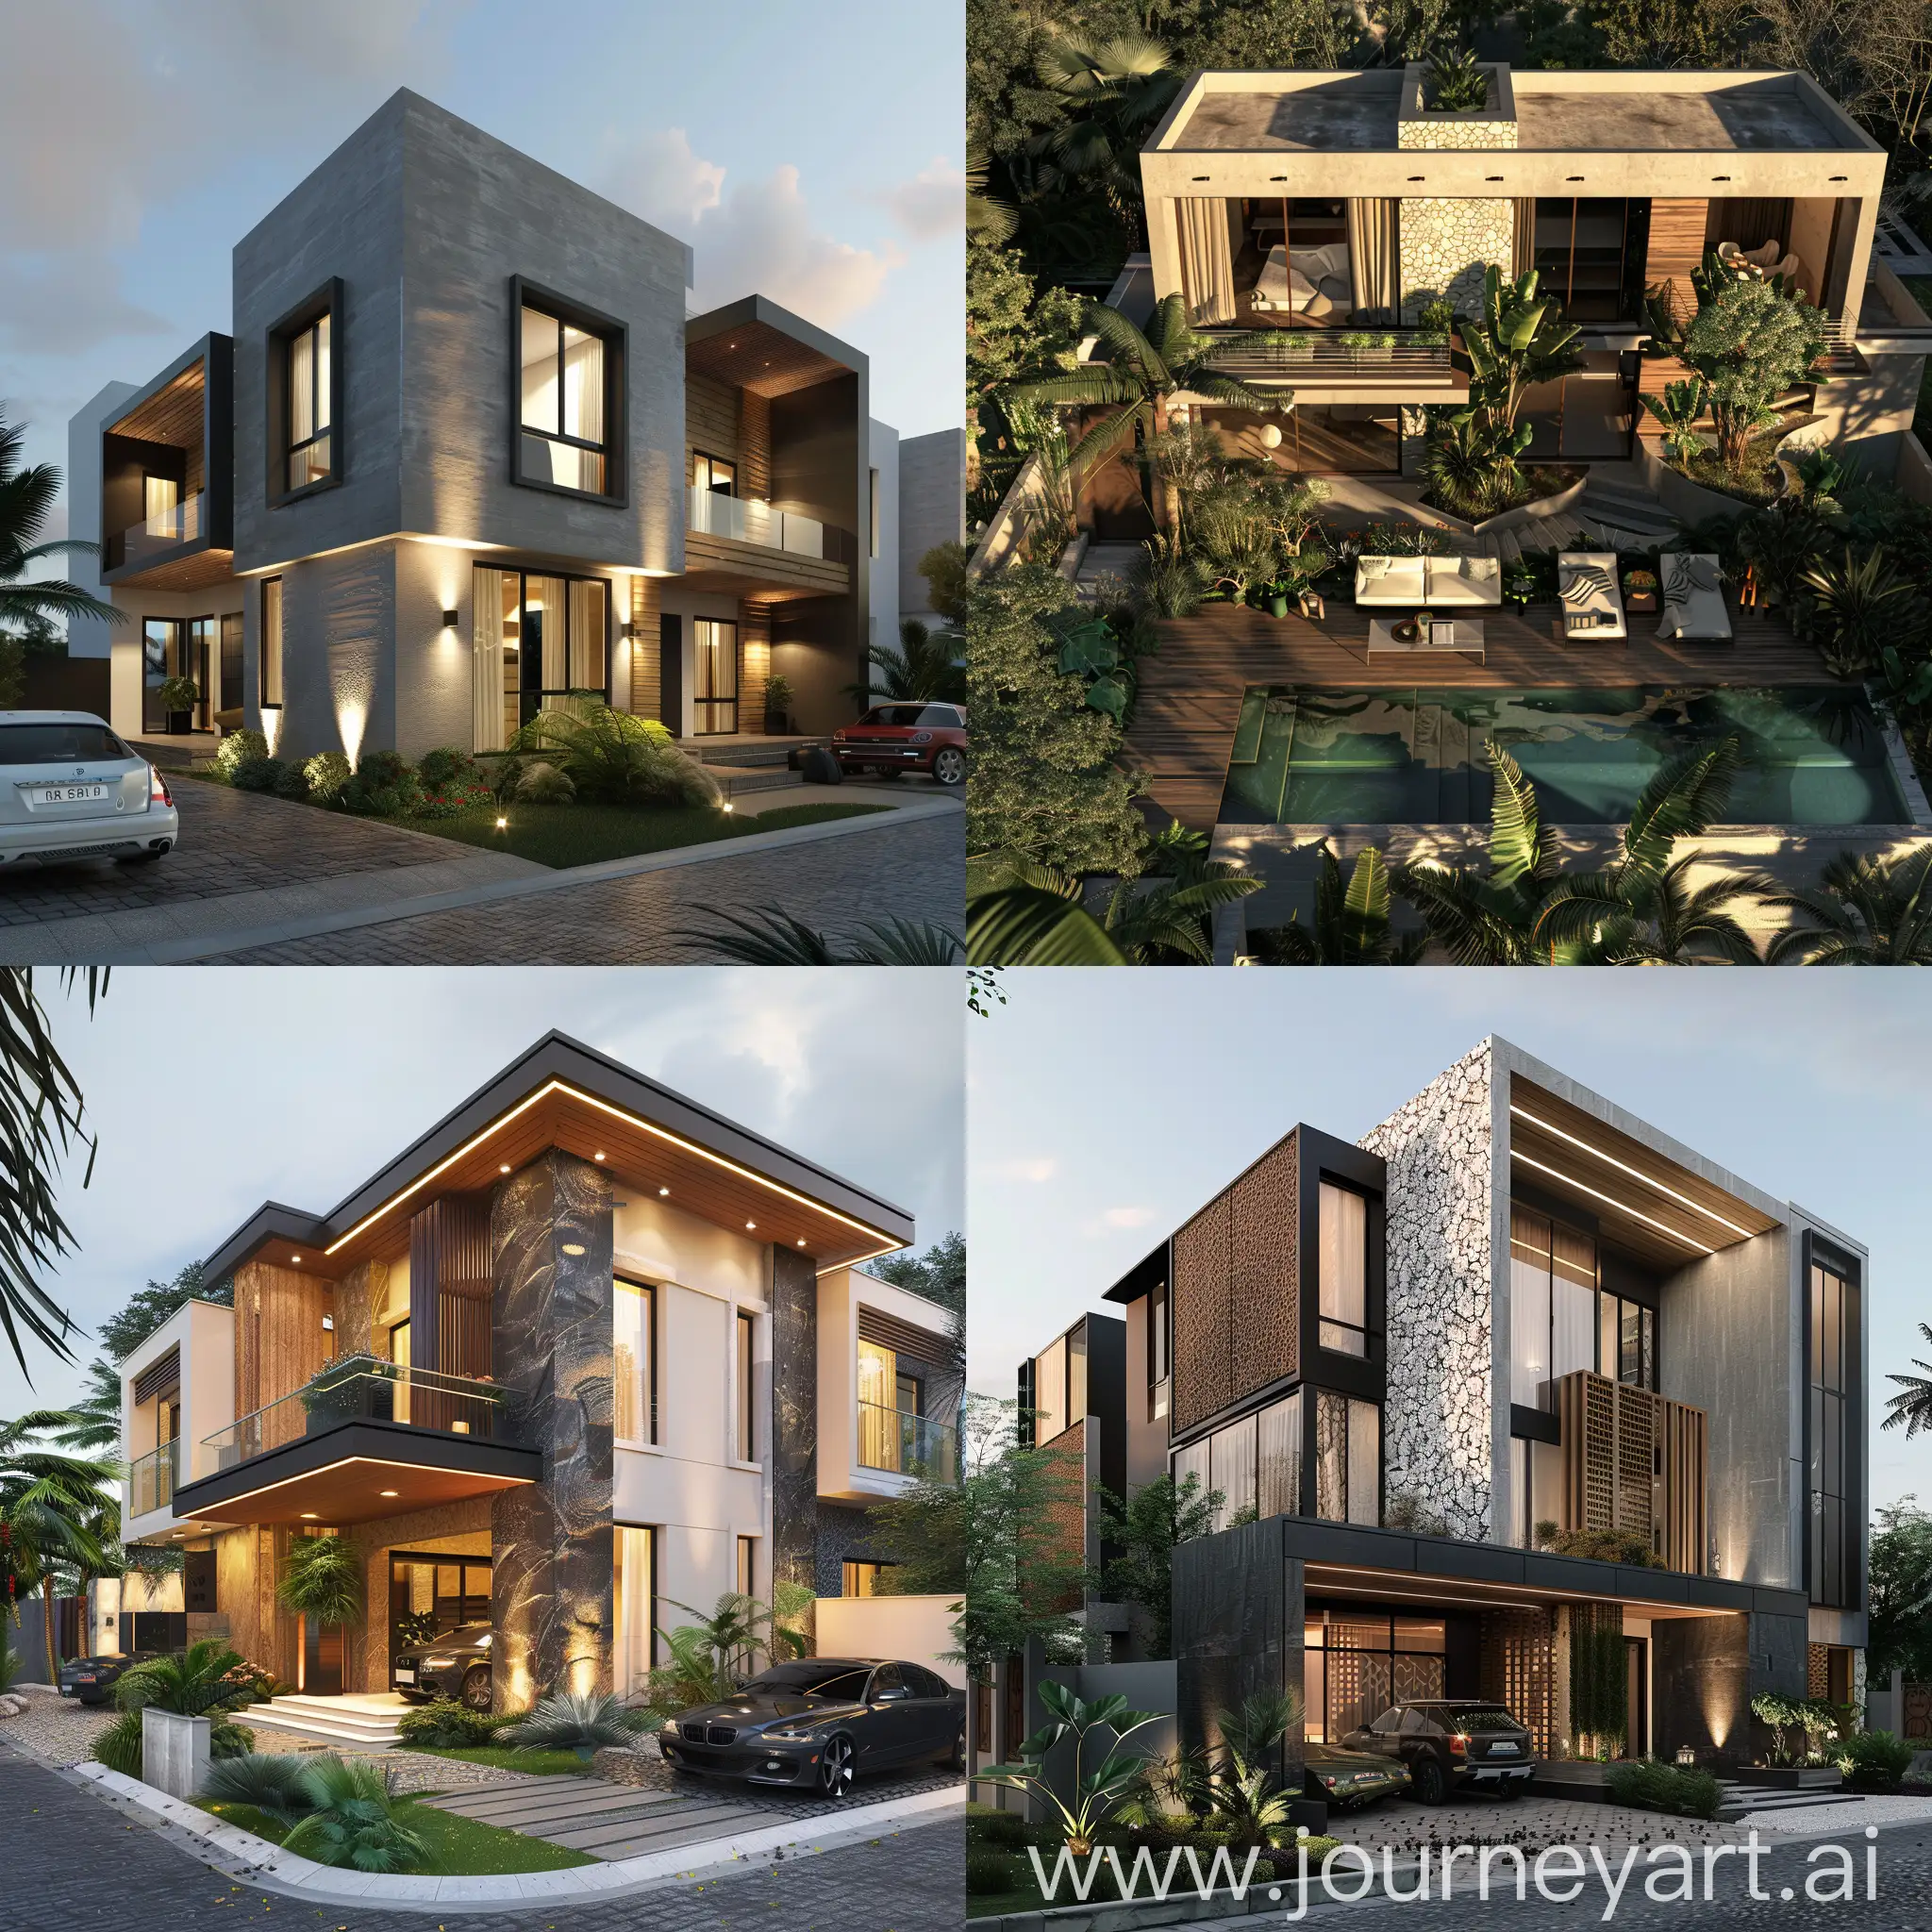 Dark-Academia-African-Fusion-Architectural-Render-of-a-3Bedroom-House